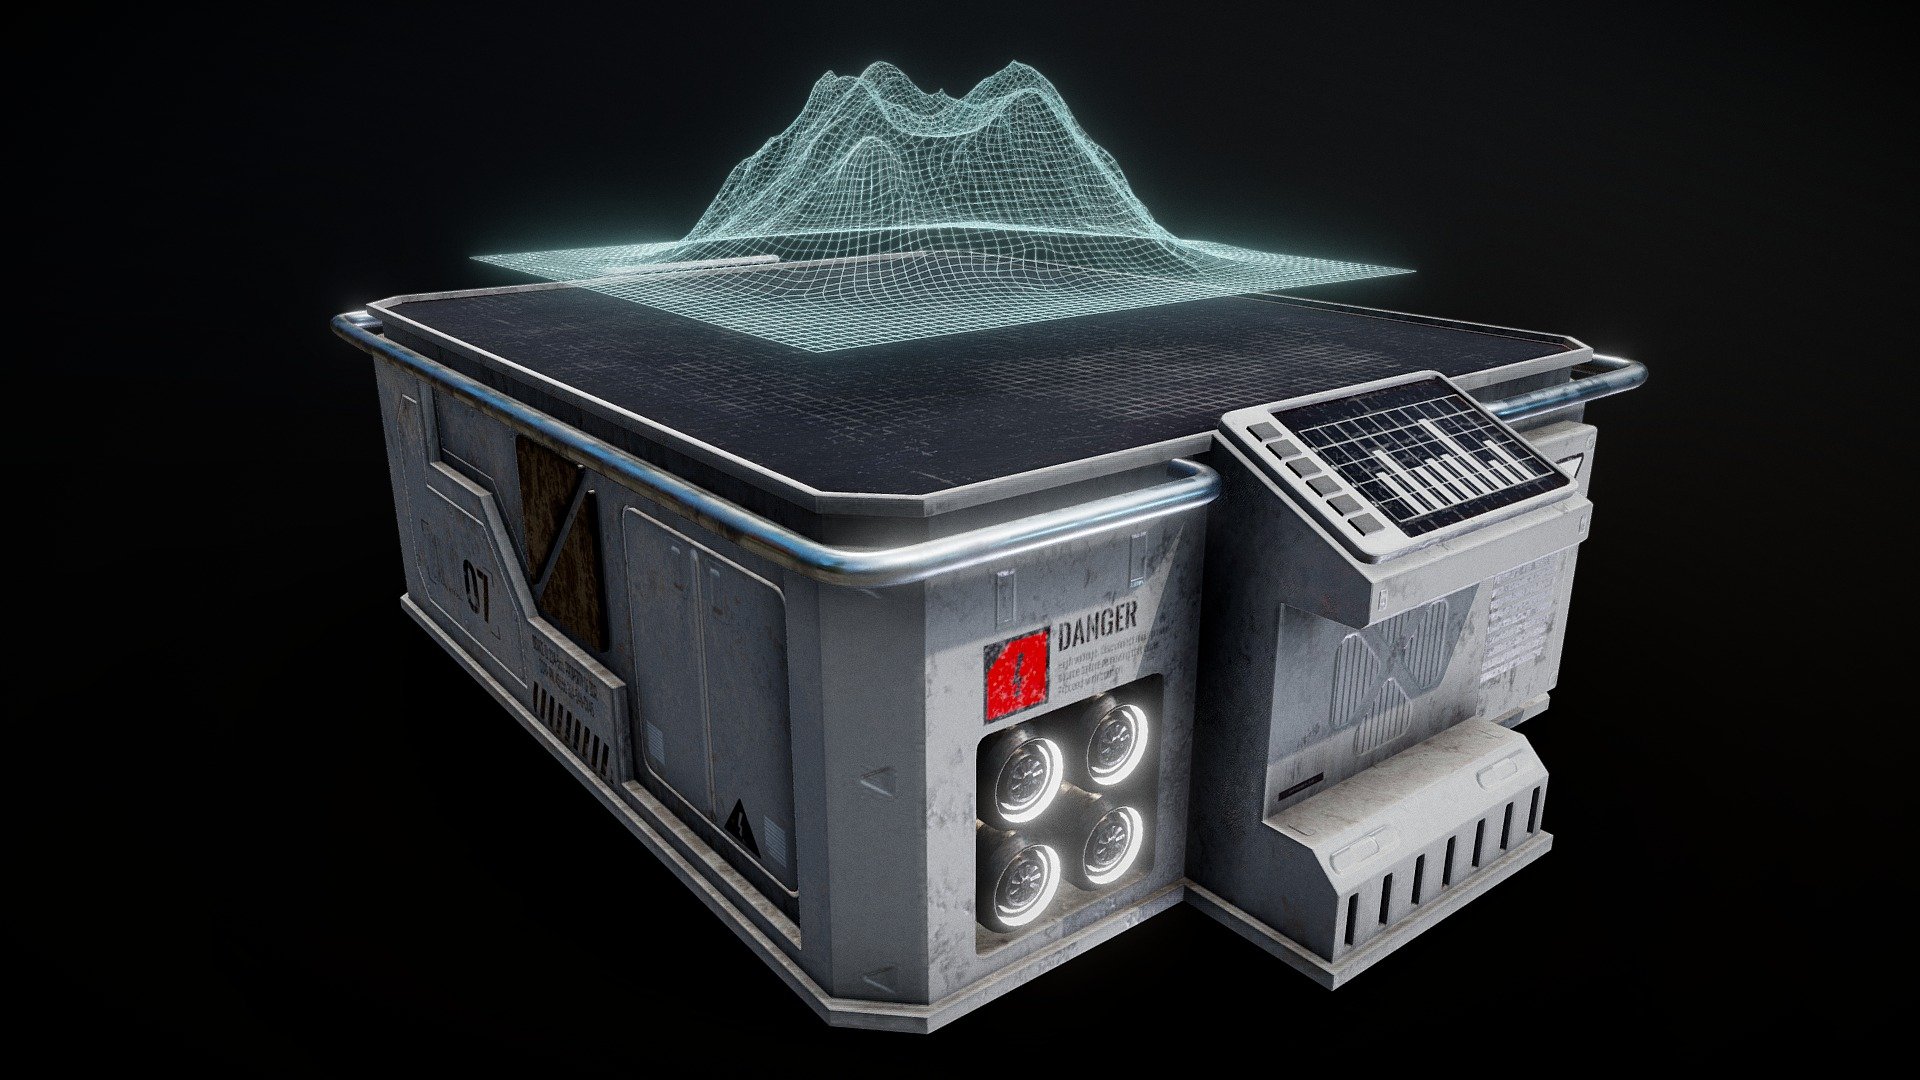 Sci fi Hologram Table with 4k Textures.All Textures,Blend file and 3D files are included in Additional Files.The Textures used in preview are 2k.4k textures are in Additional Files.
All Maps like Diffuse,Normal,Metallic,Roughness and Emissive included in additional files.
Emissive material not visible here because it is mapped in seperate texture.That is only visible in other 3D programs and Game Engines.
Thank You 3d model